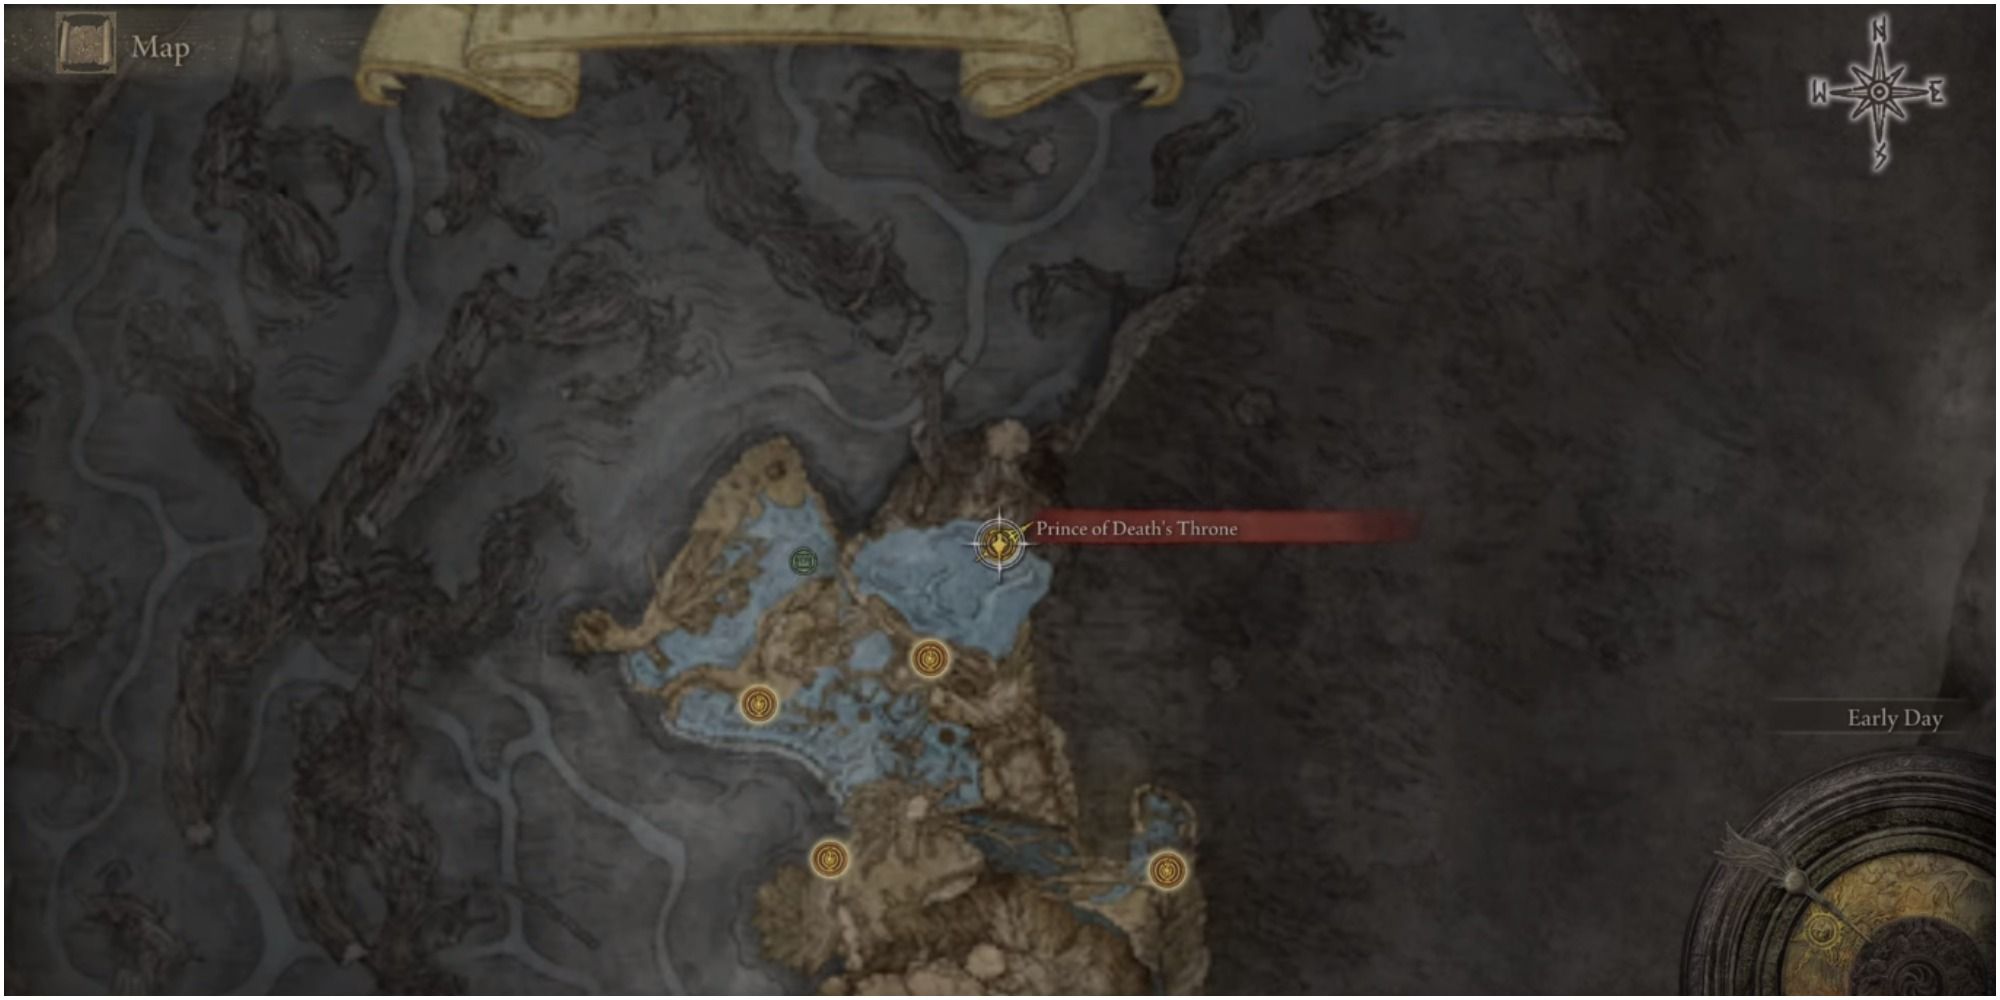 The map showing the location of Prince of Death's Throne.